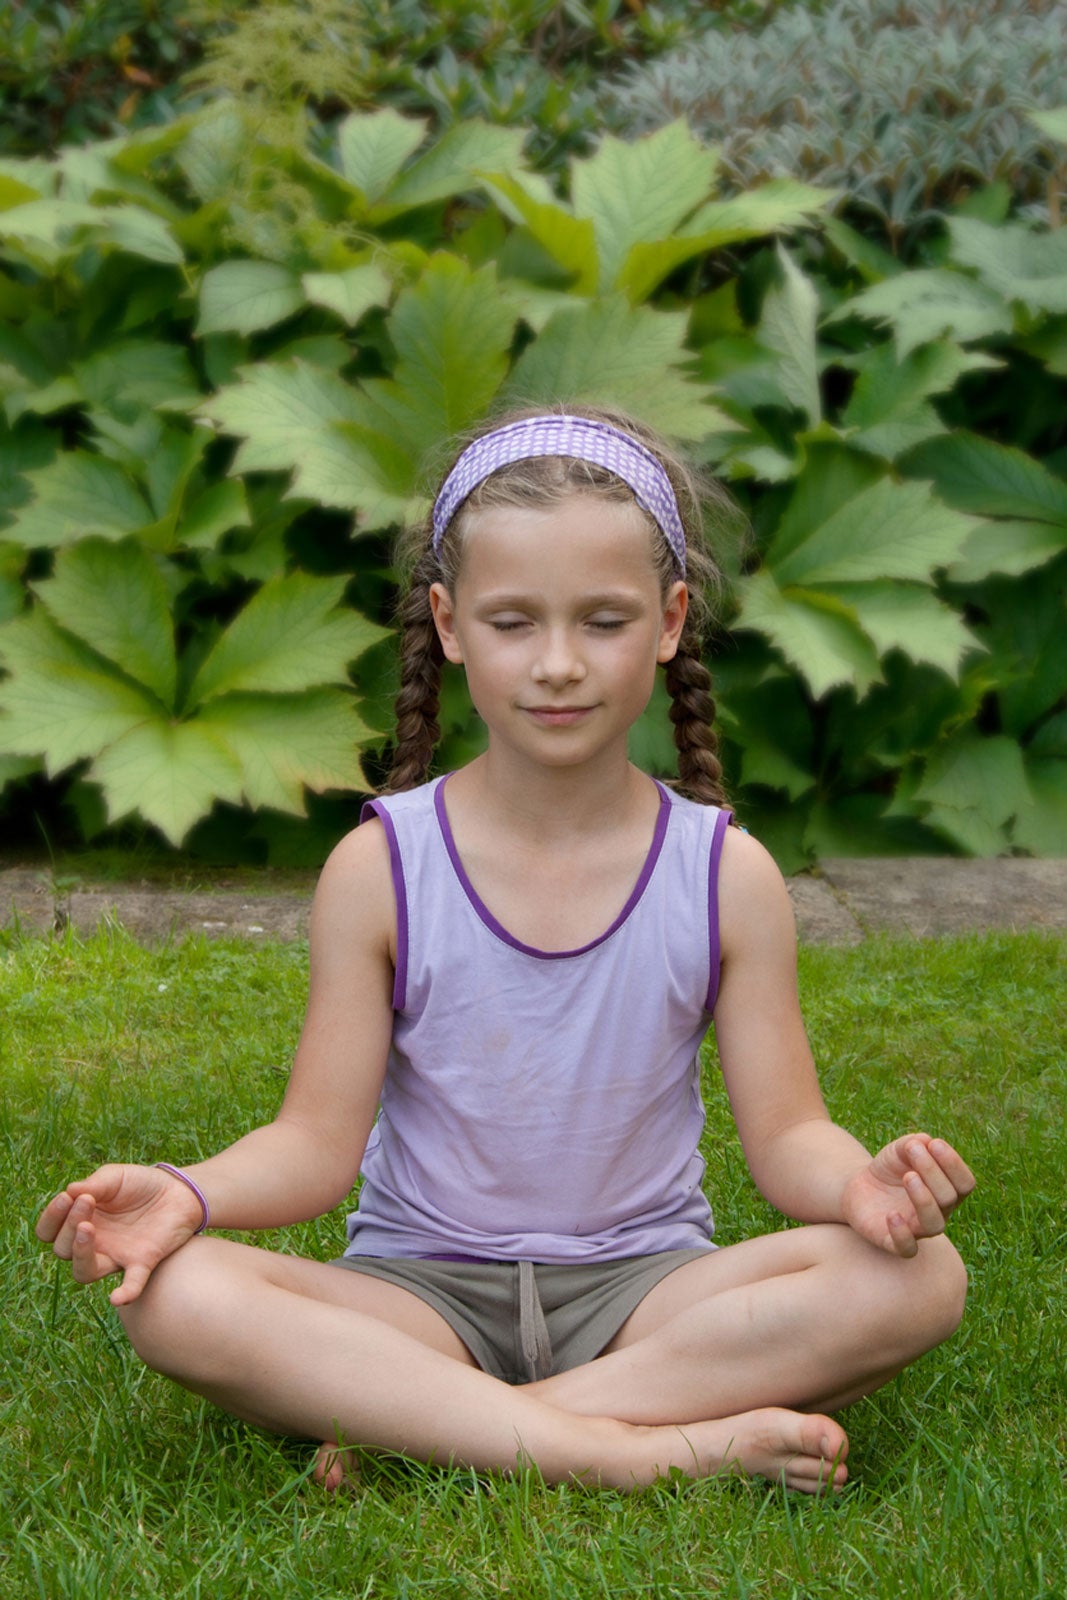 Kids And Garden Yoga: How To Enjoy Yoga In The Garden With Kids